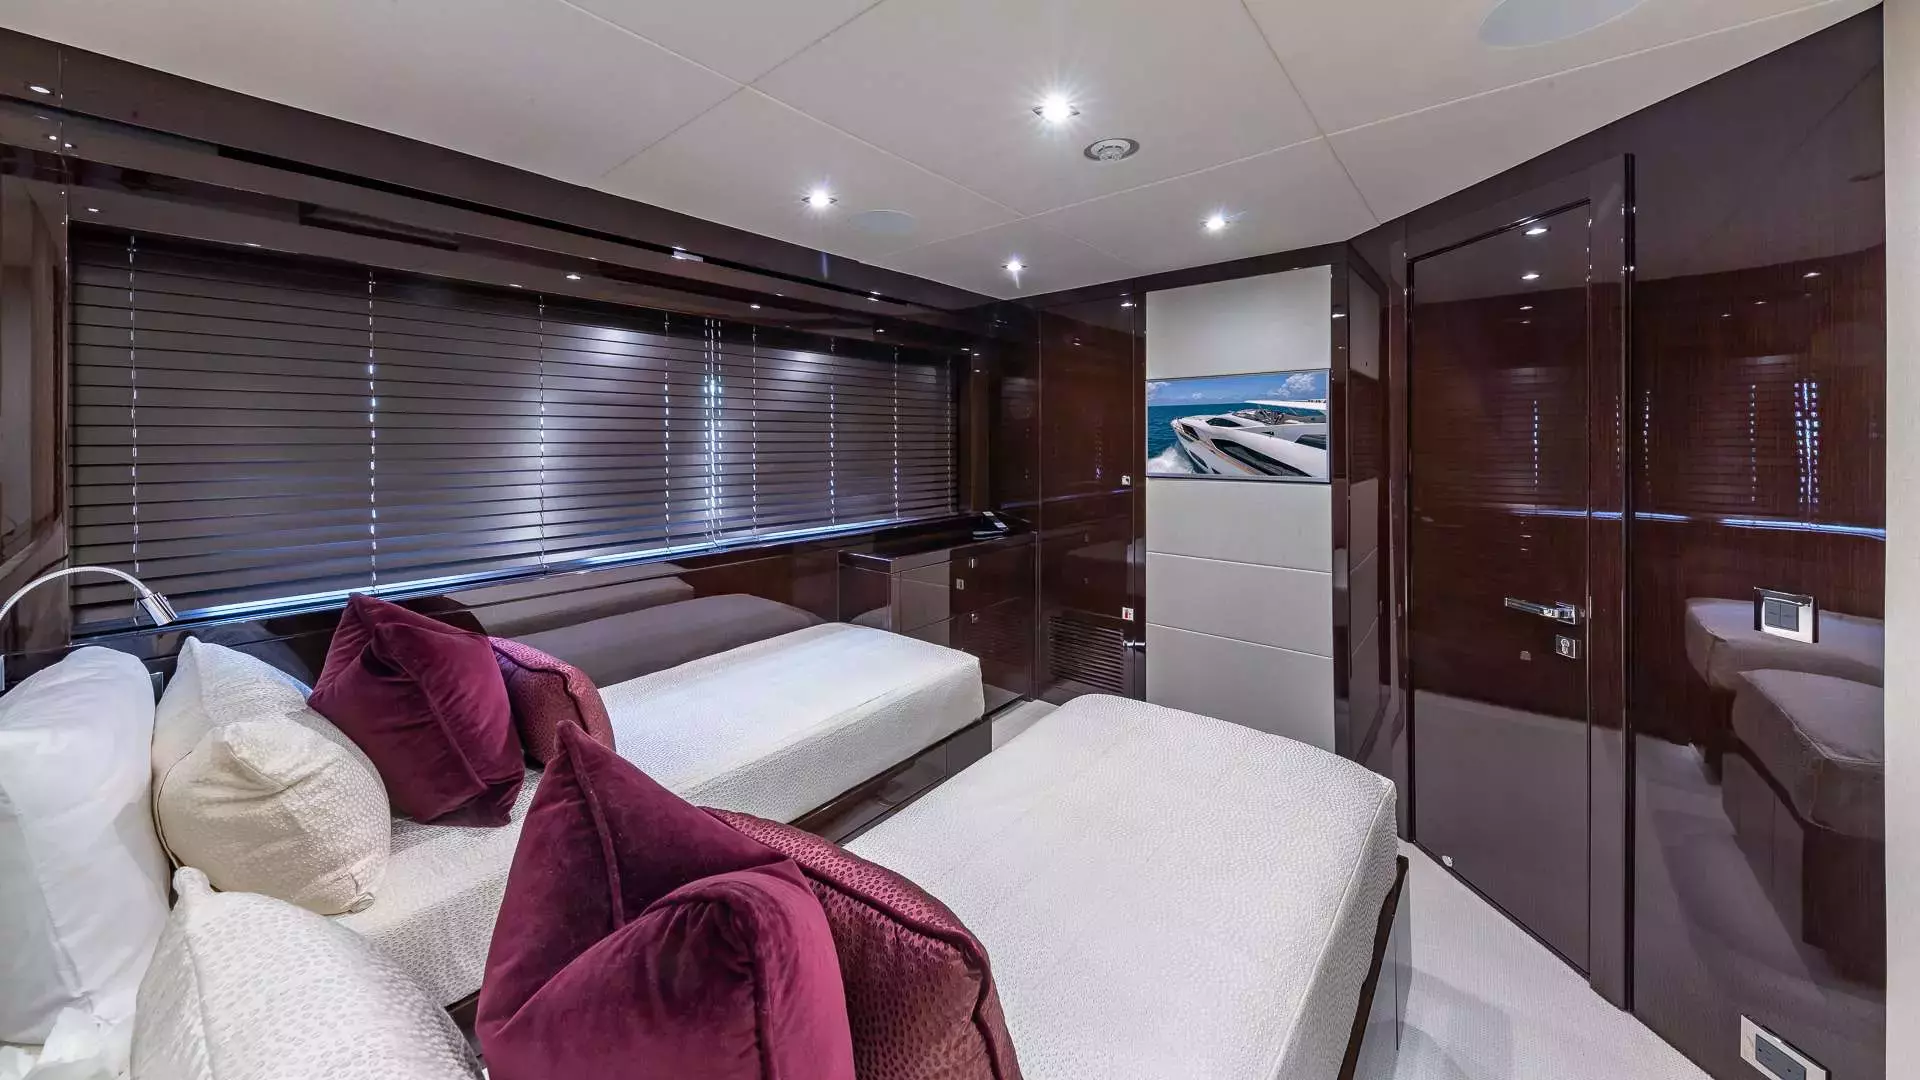 Mirracle by Sunseeker - Top rates for a Charter of a private Motor Yacht in Florida USA